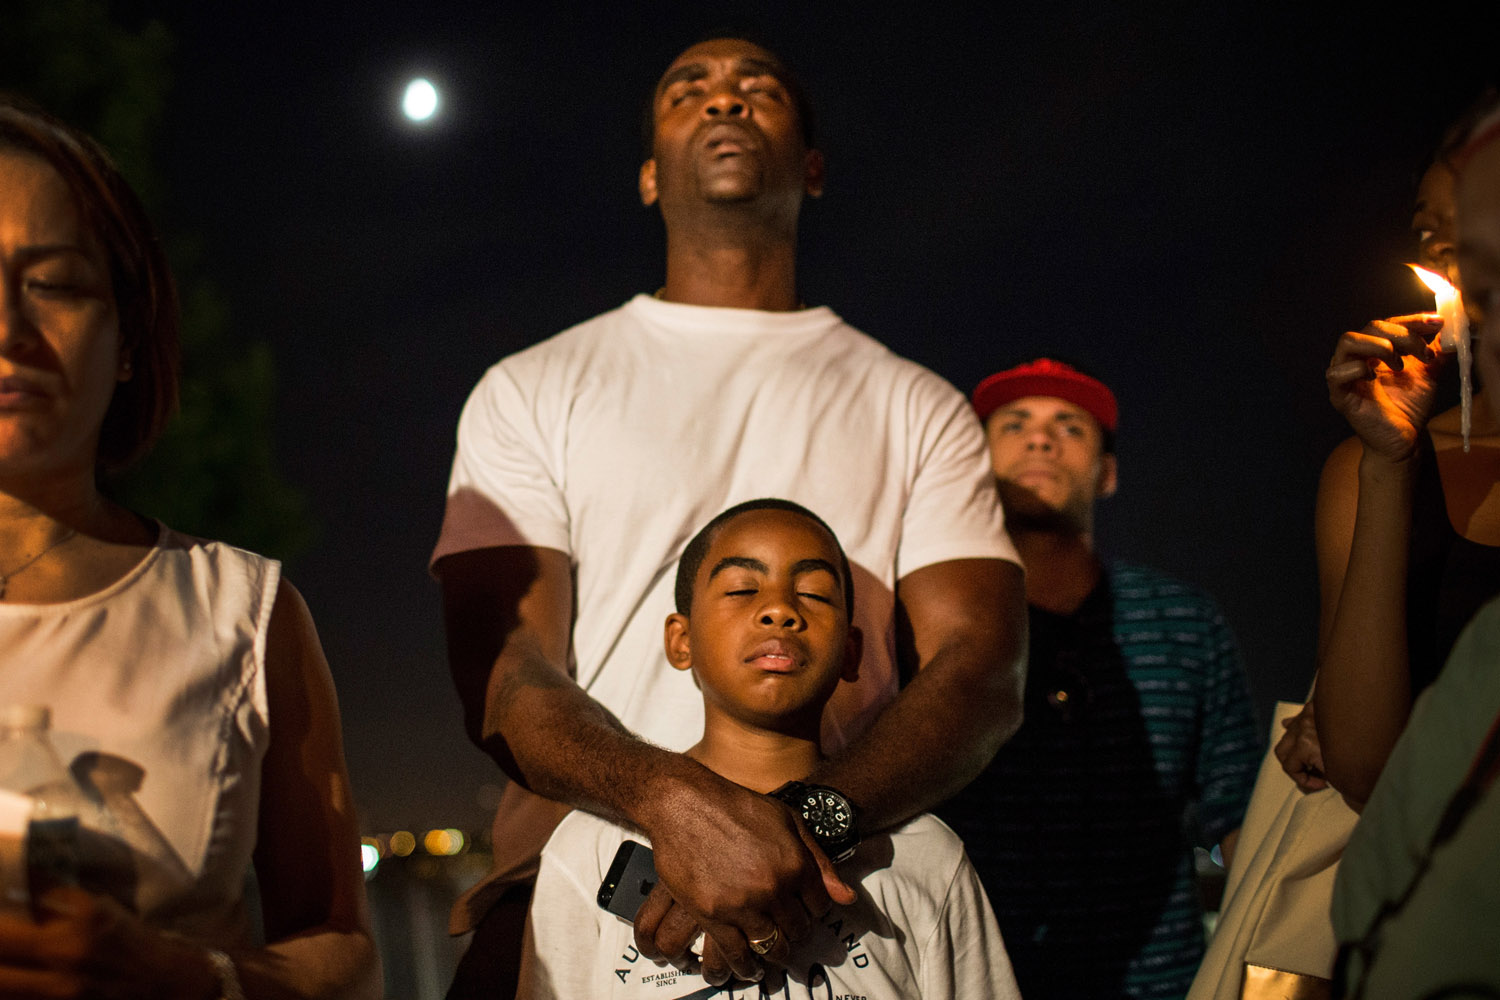 July 15, 2013. A man holds his son while participating in a candle lit vigil for Trayvon Martin, the teenager who was shot and killed in Florida last year, in New York.